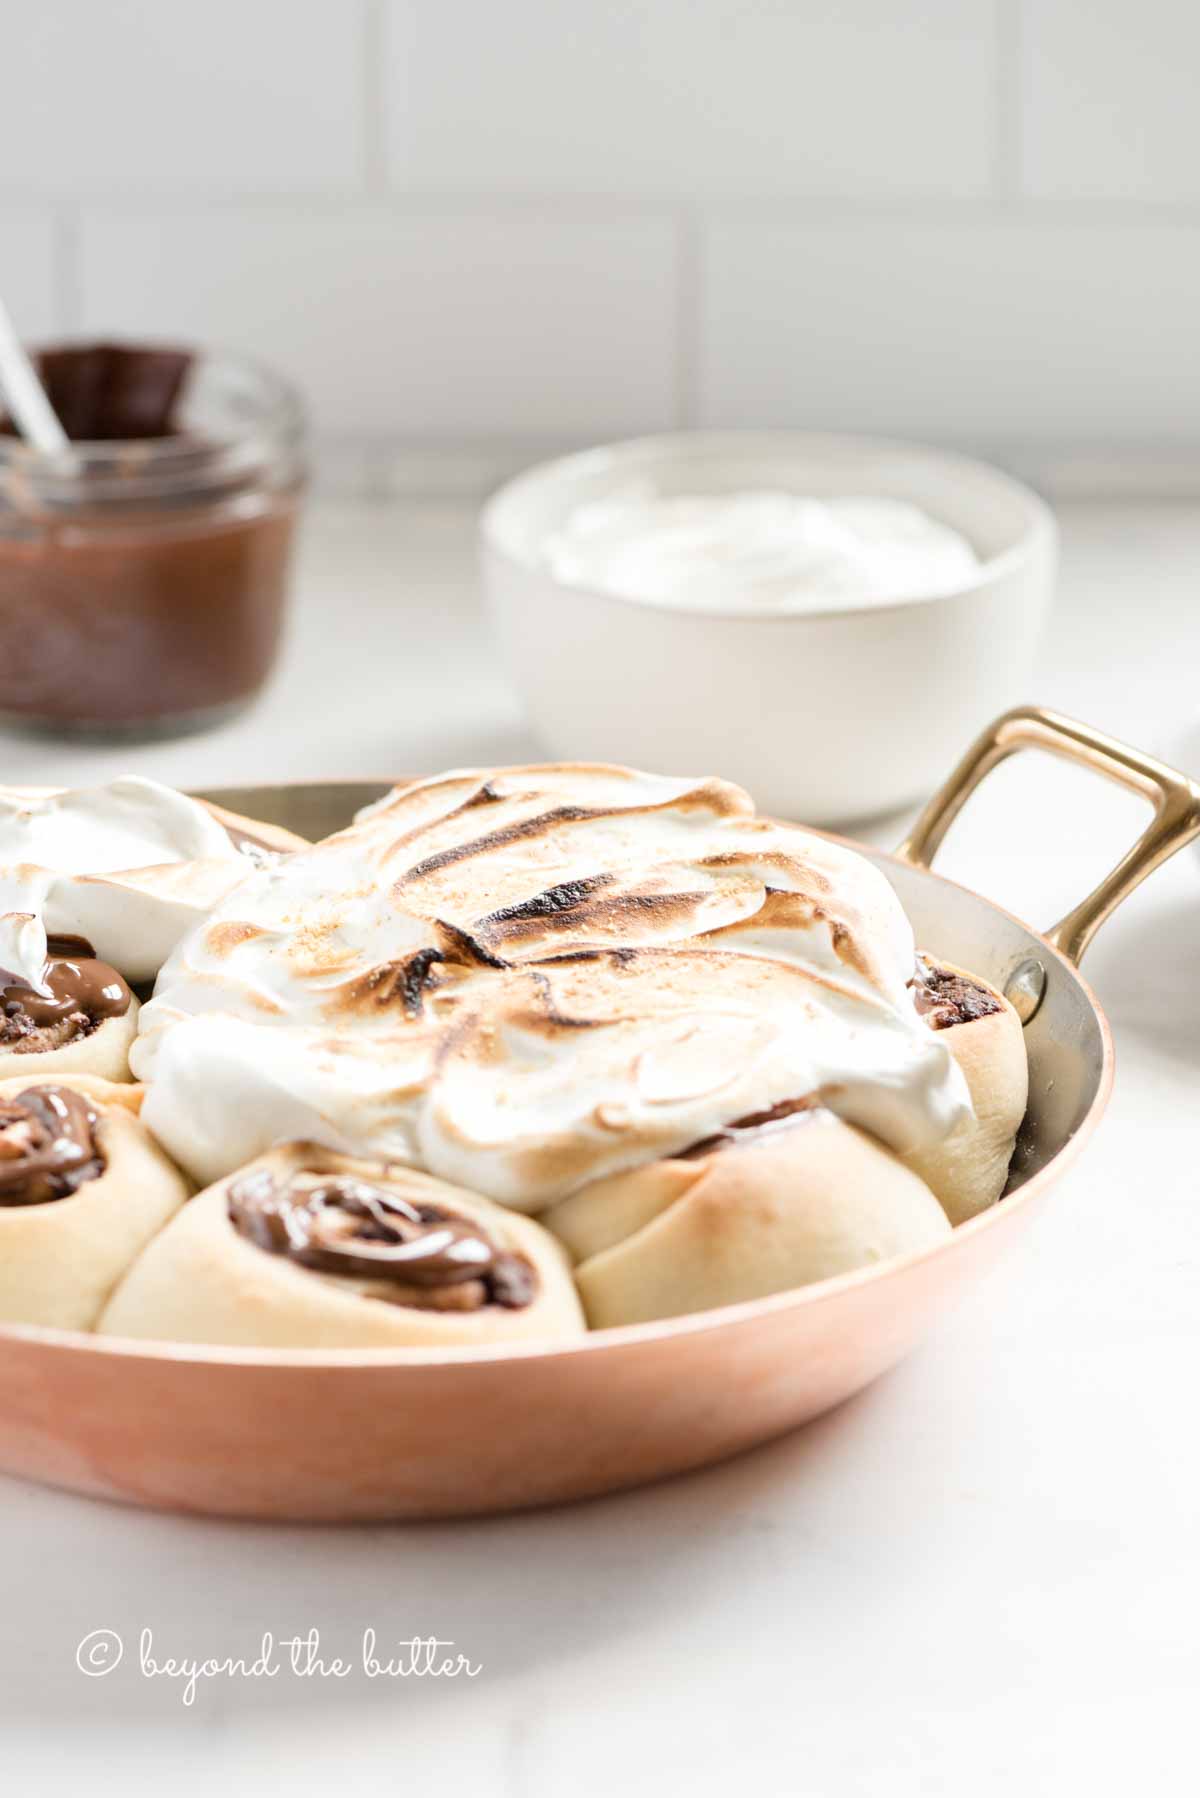 Pan of s'mores rolls on a kitchen counter with bowl of marshmallow topping and melted chocolate | All Images © Beyond the Butter™